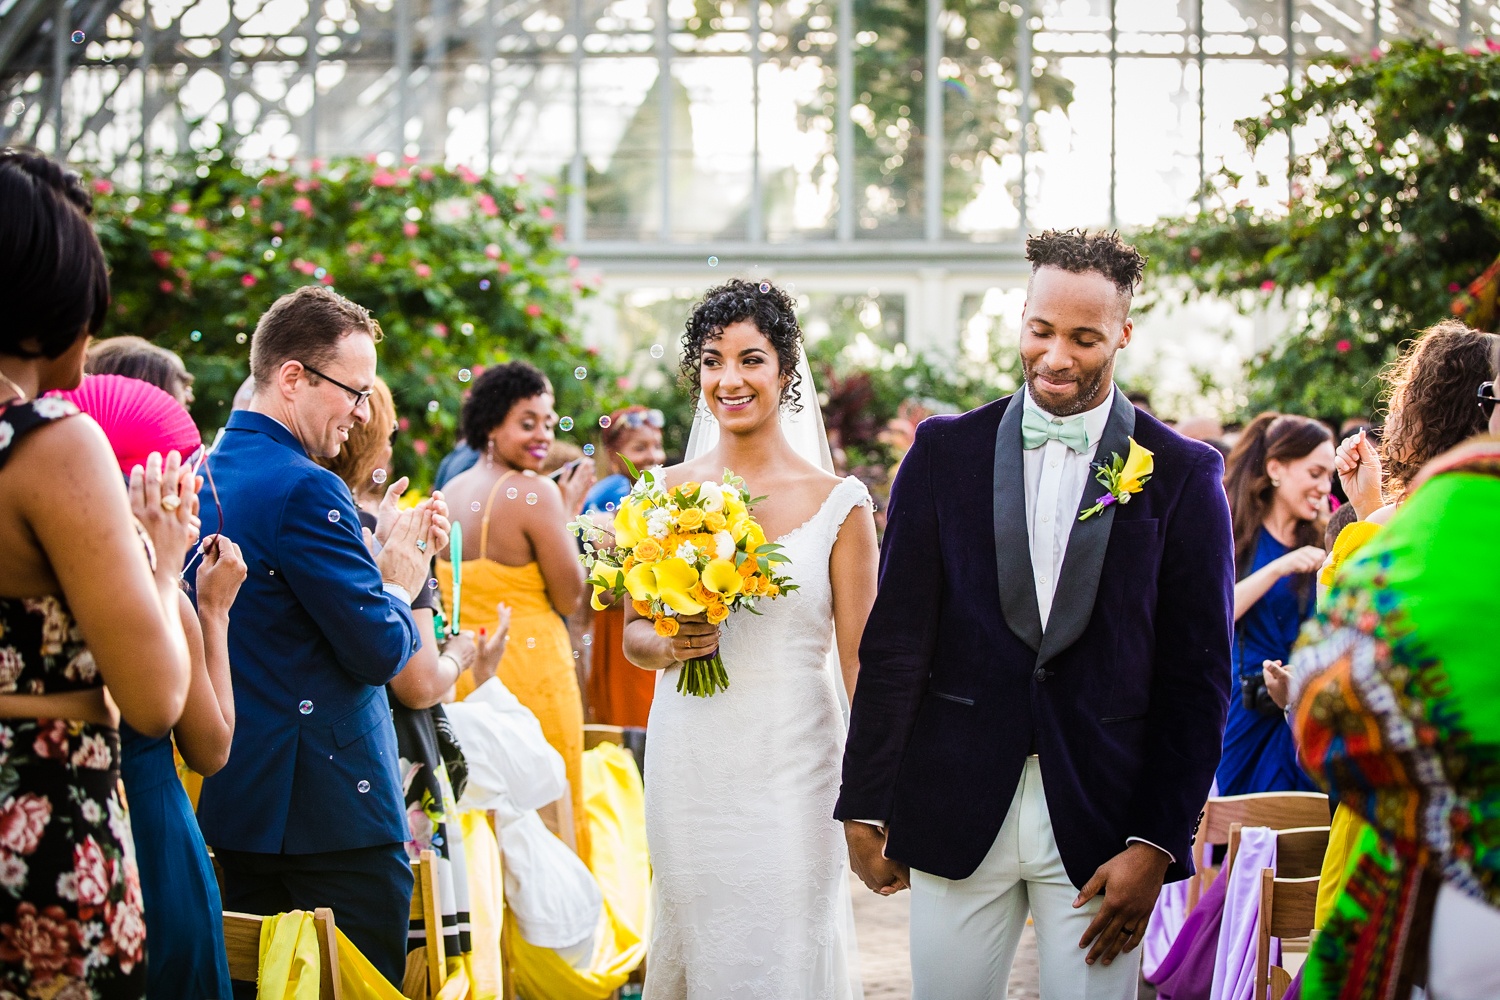 A couple walks down the aisle at the end of their Garfield Park Conservatory wedding.